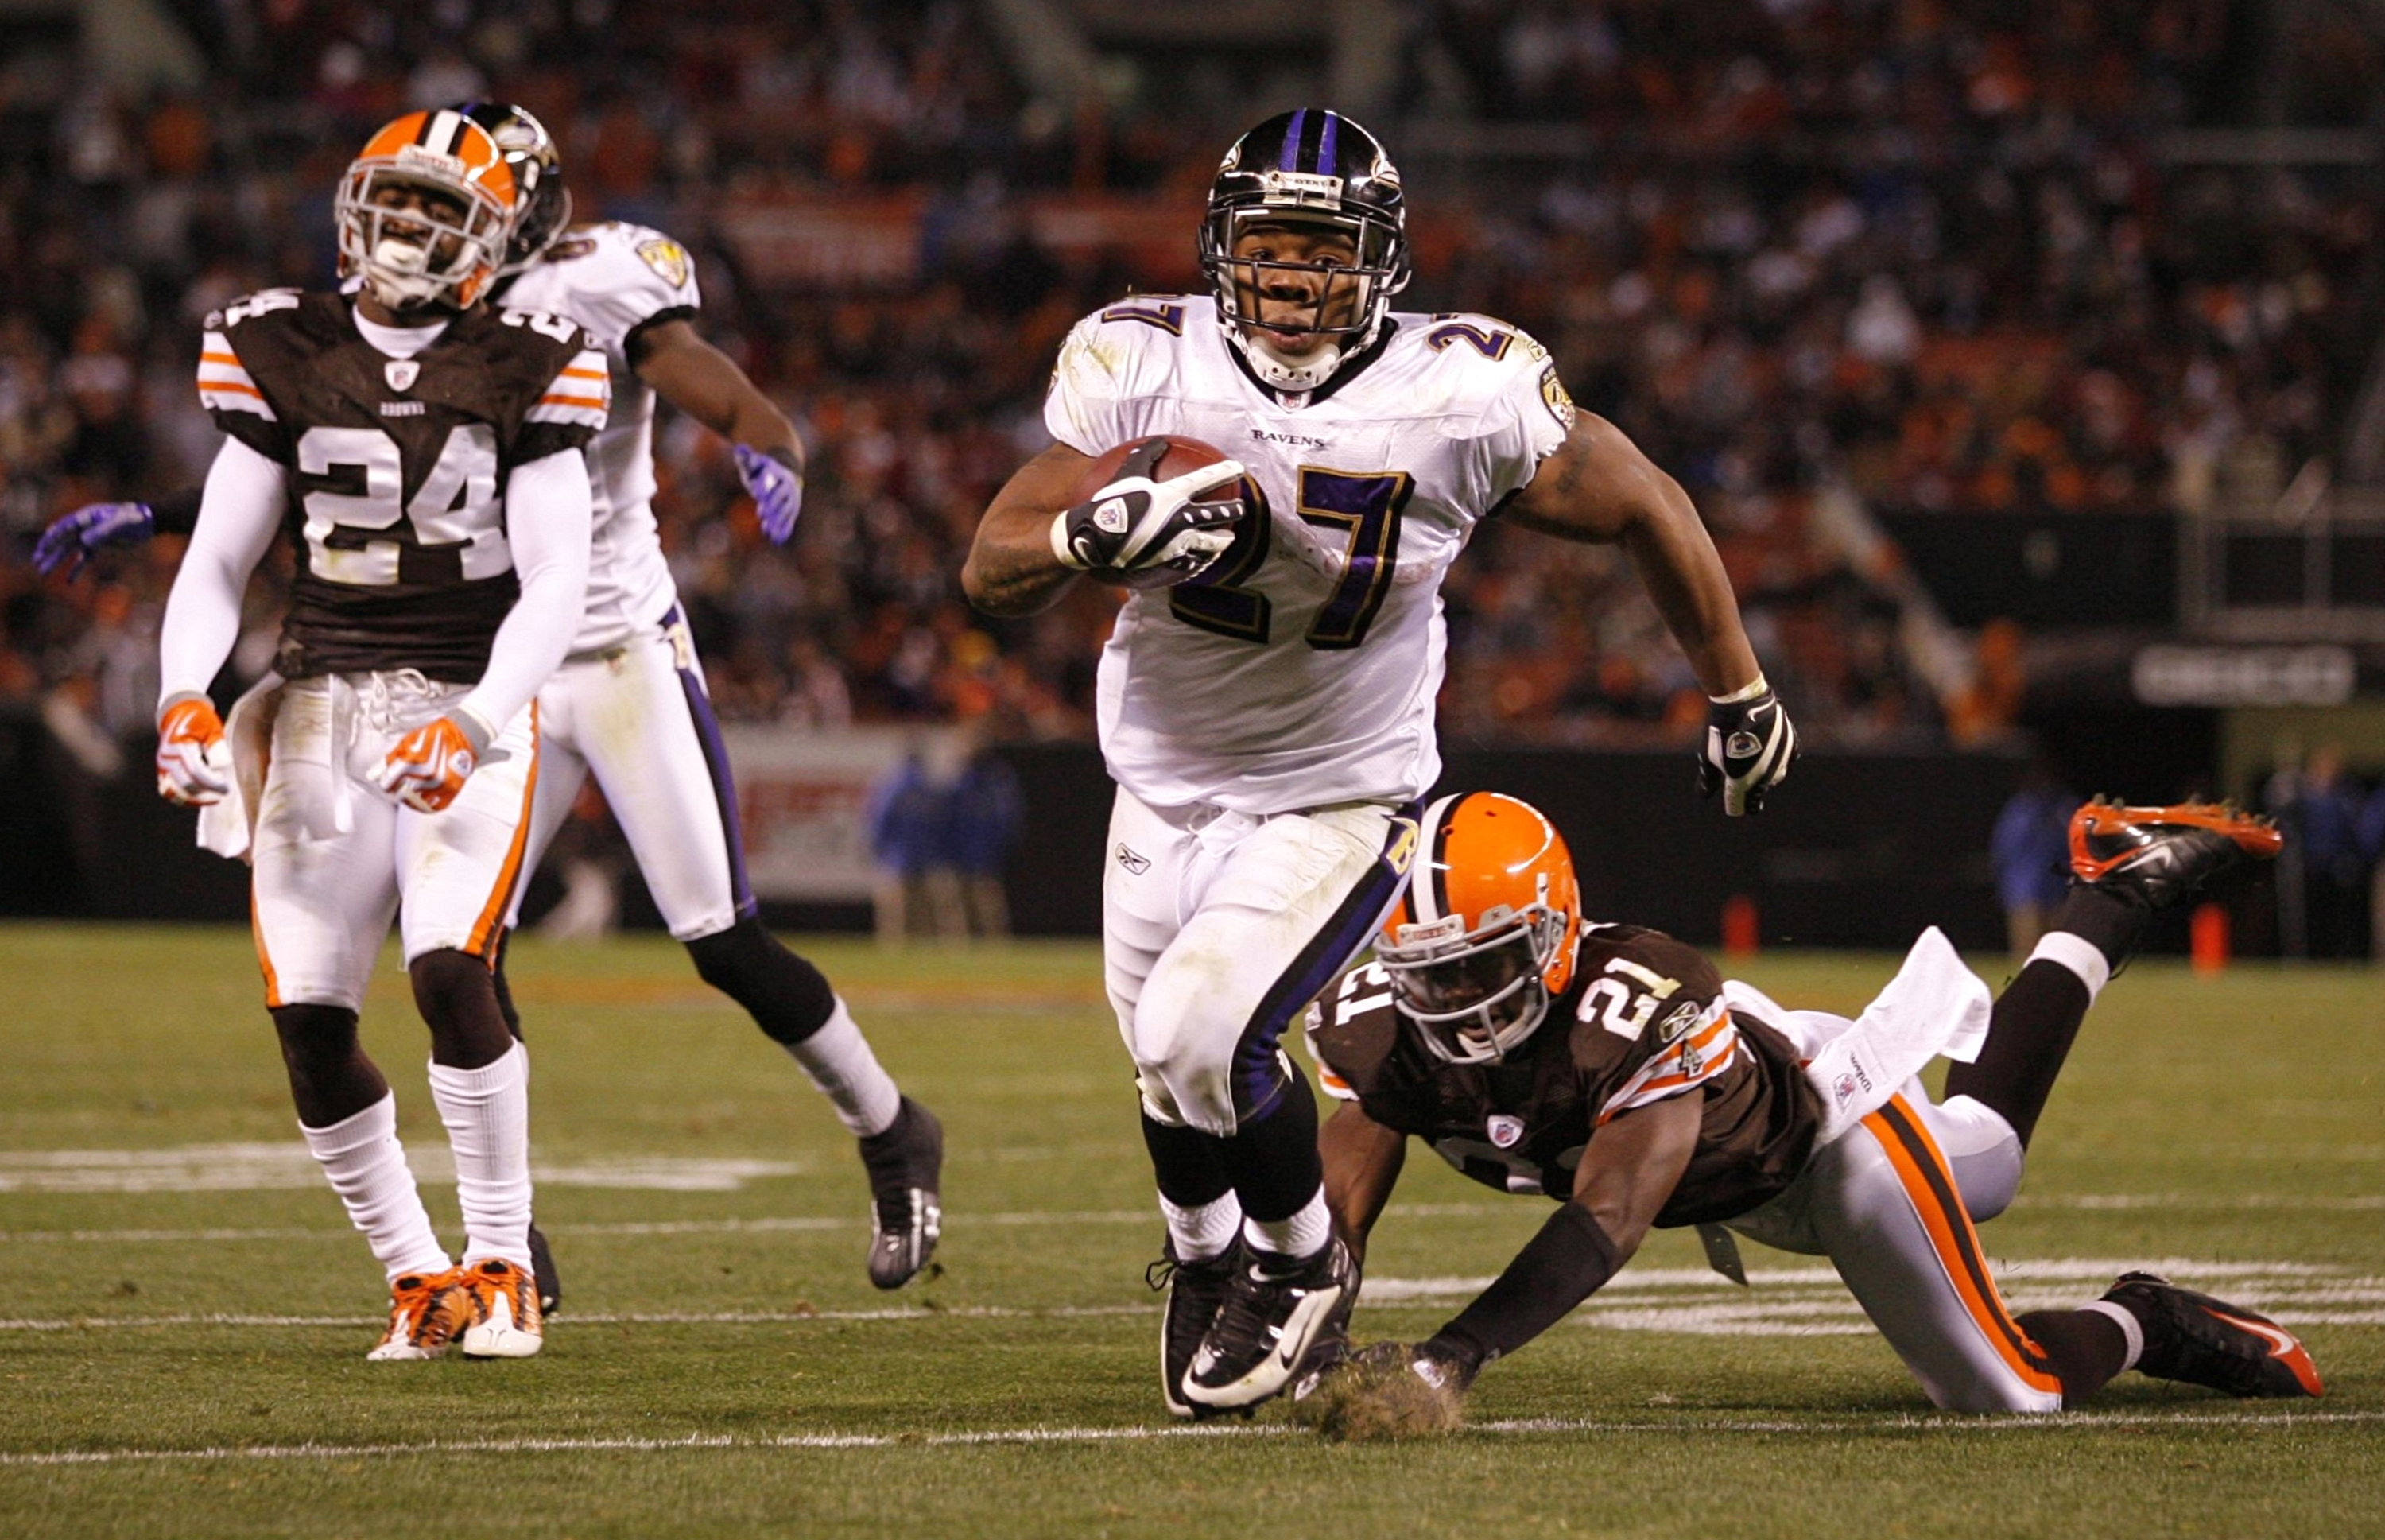 CLEVELAND - NOVEMBER 16: Ray Rice #27 of the Baltimore Ravens scores a 13-yard touchdown in the third quarter against Brodney Pool #21 and Eric Wright #24 of the Cleveland Browns at Cleveland Browns Stadium on November 16, 2009 in Cleveland, Ohio.  (Photo